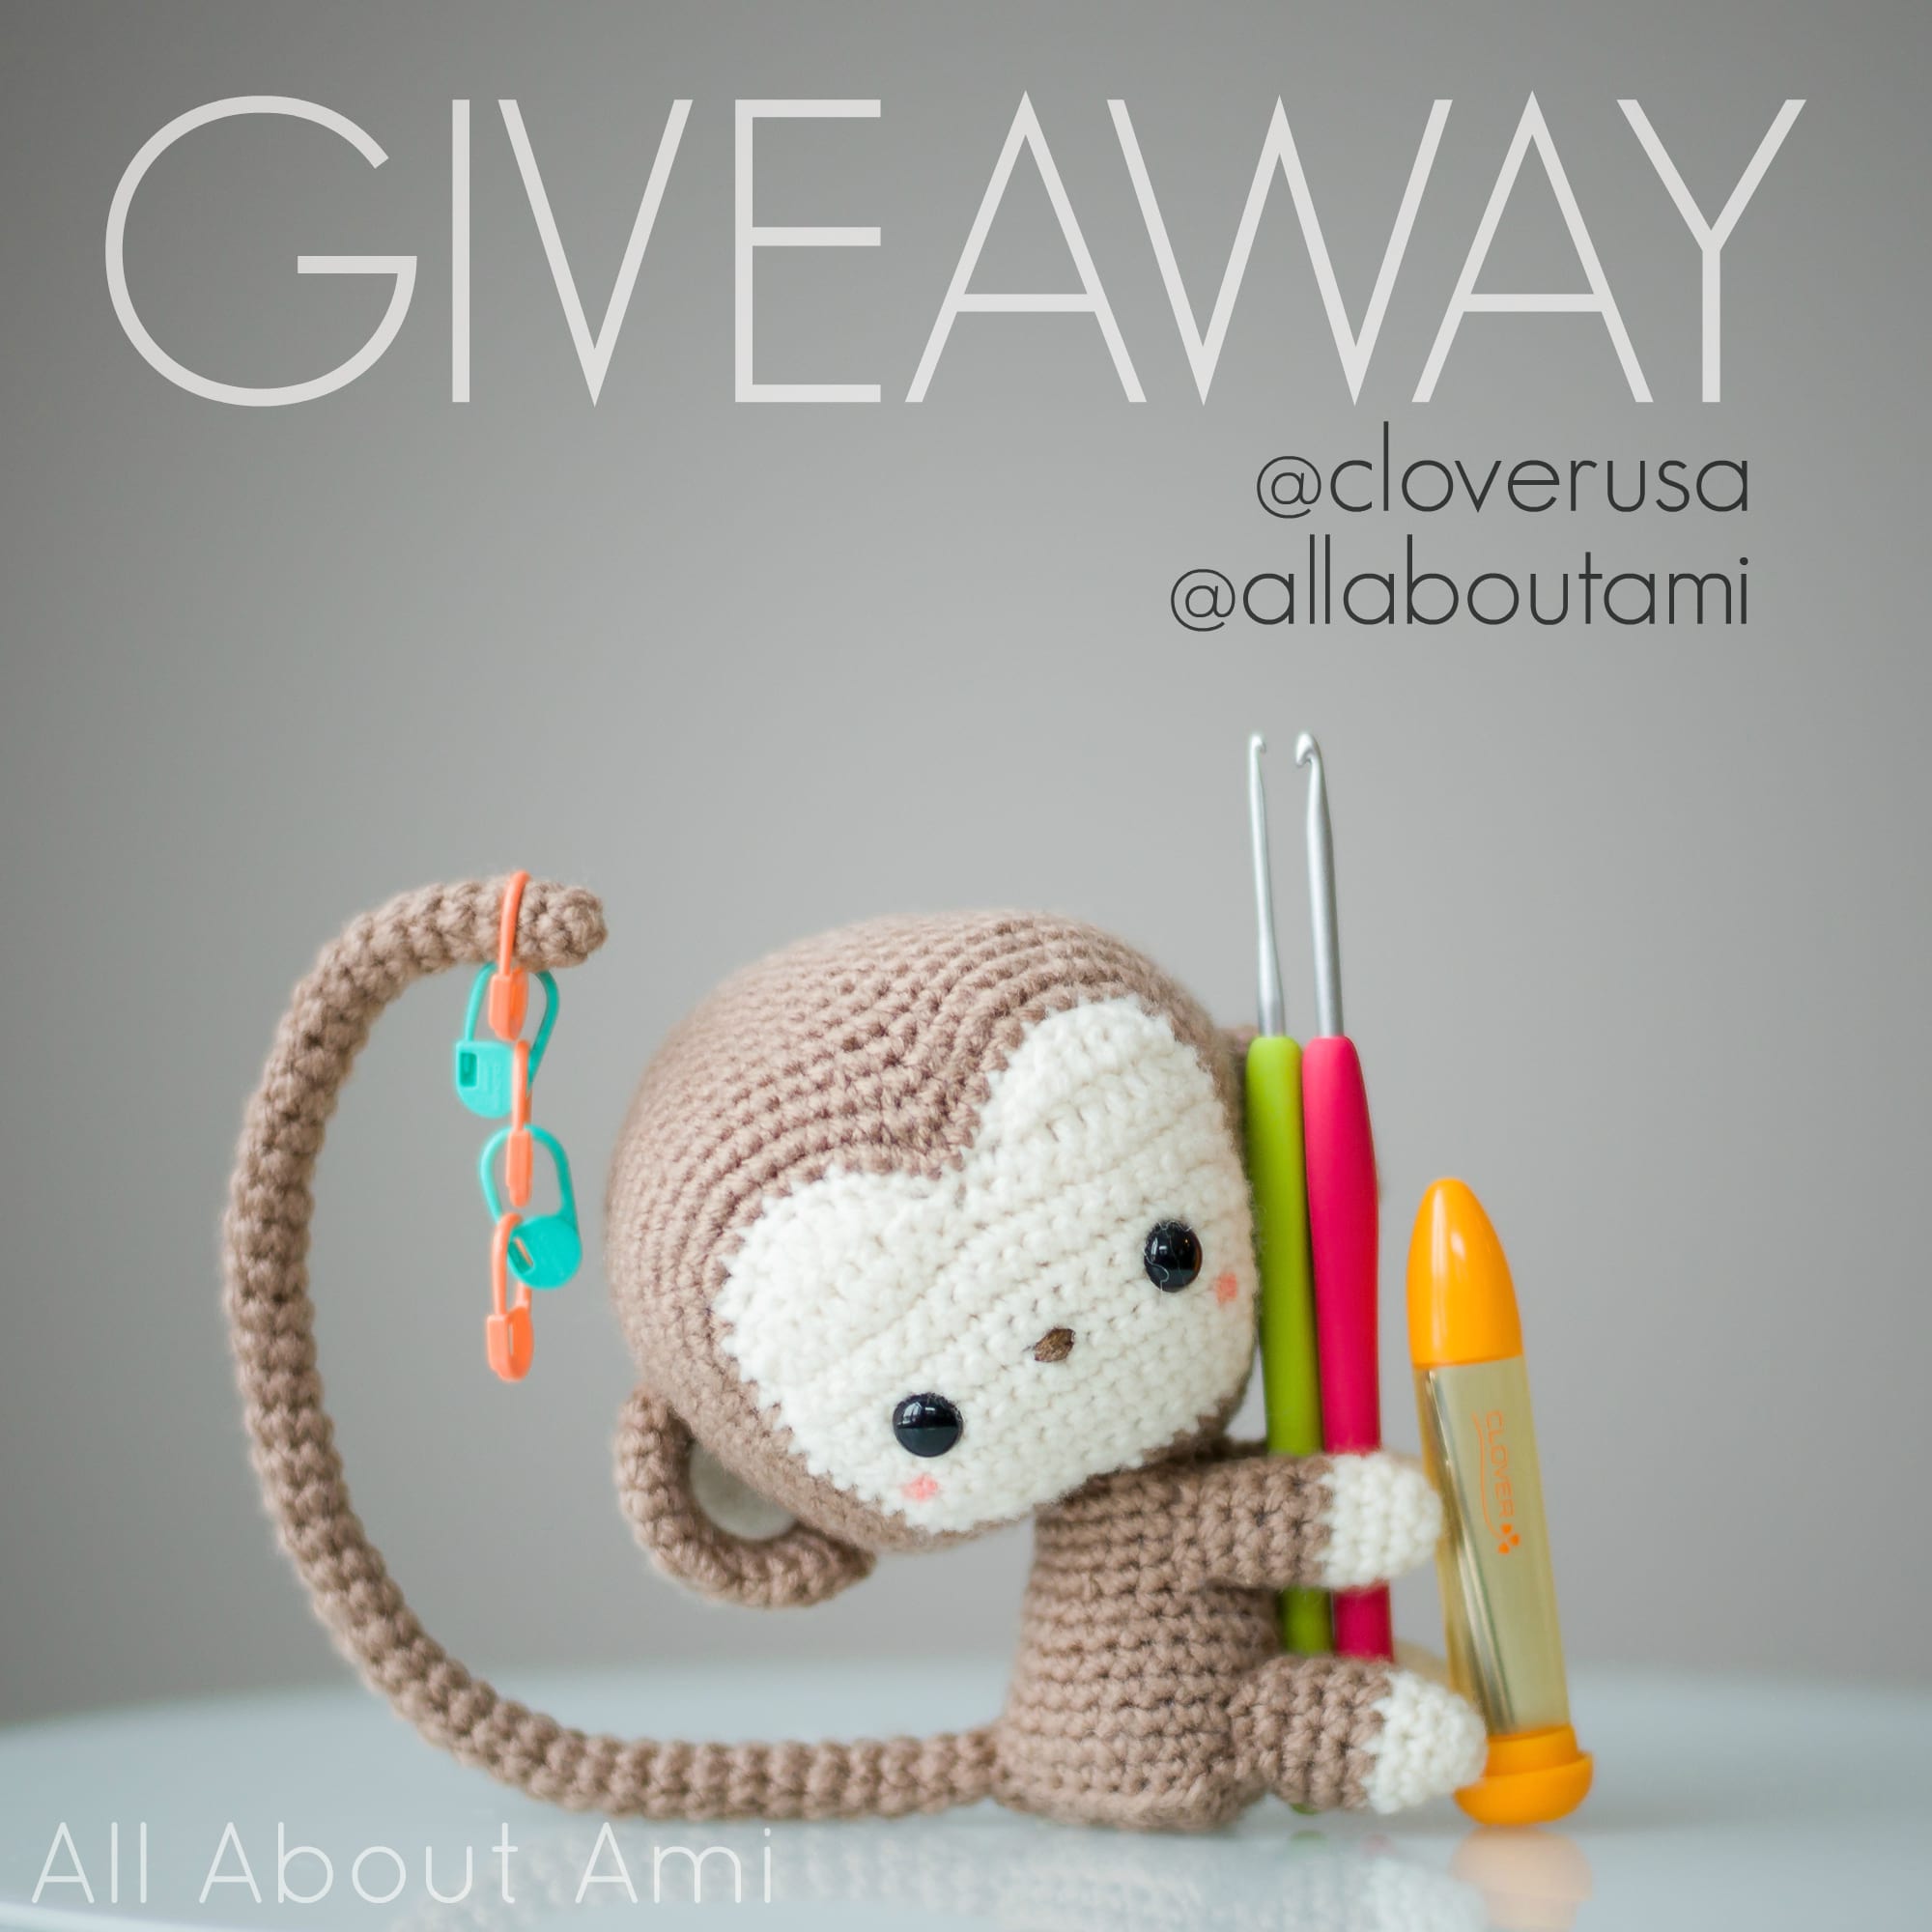 Clover Amour Jumbo Hooks Review & Giveaway - All About Ami